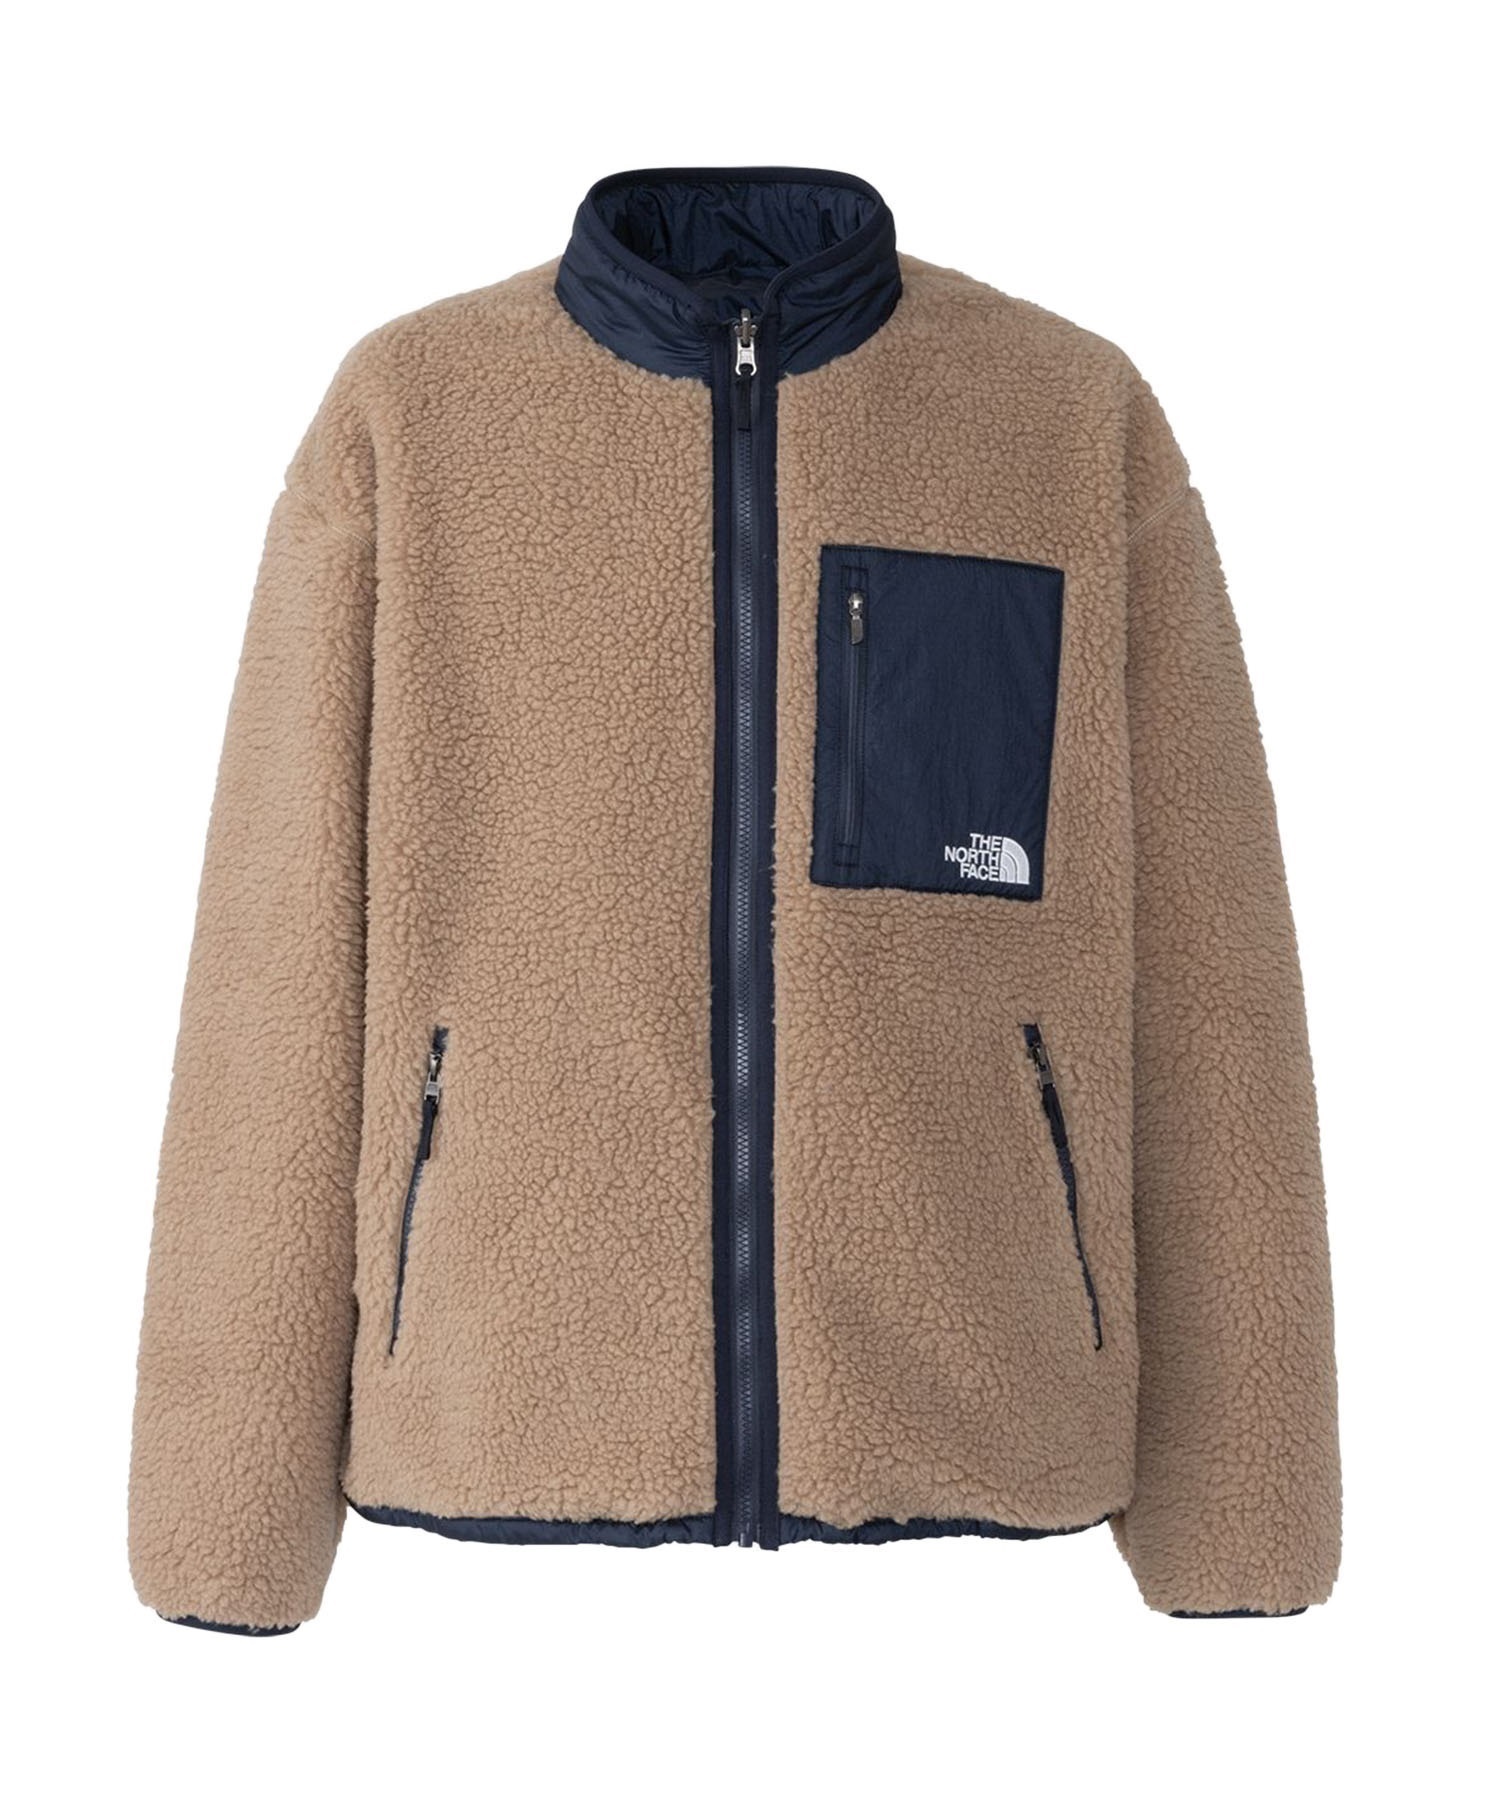 THE NORTH FACE/ザ・ノース・フェイス Reversible Extreme Pile Jacket